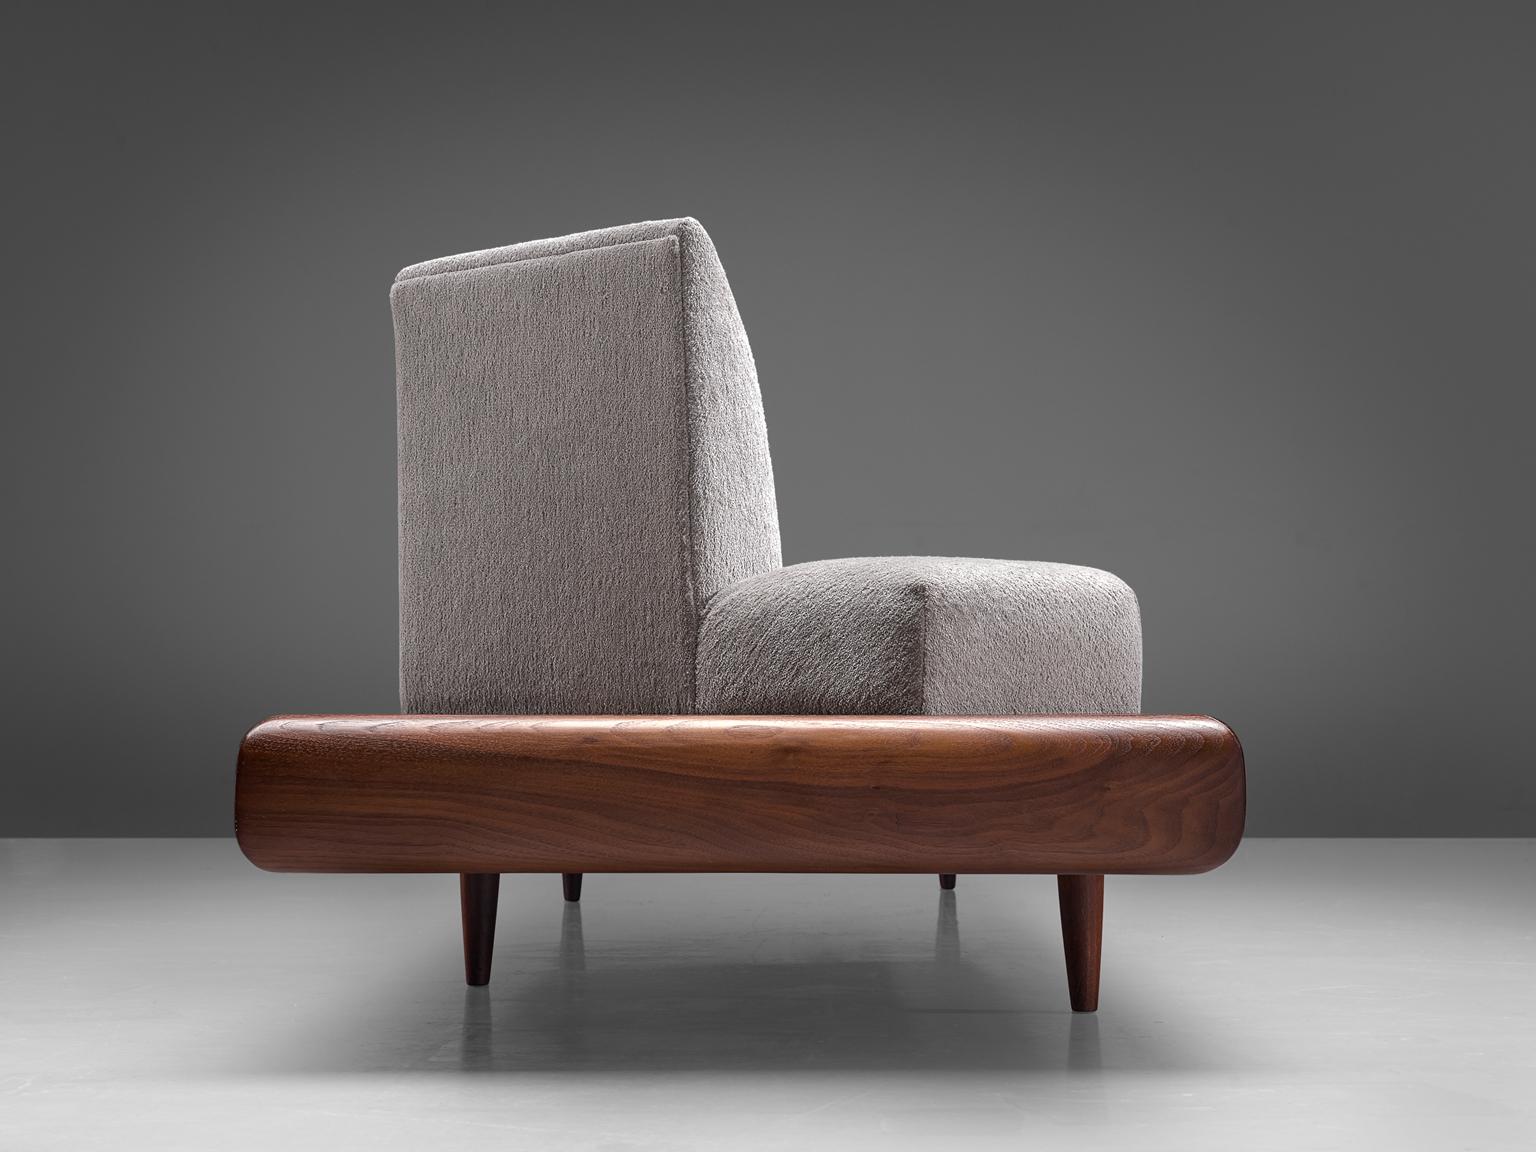 American Adrian Pearsall 'Platform' Sofa Reupholstered in Pierre Frey Fabric